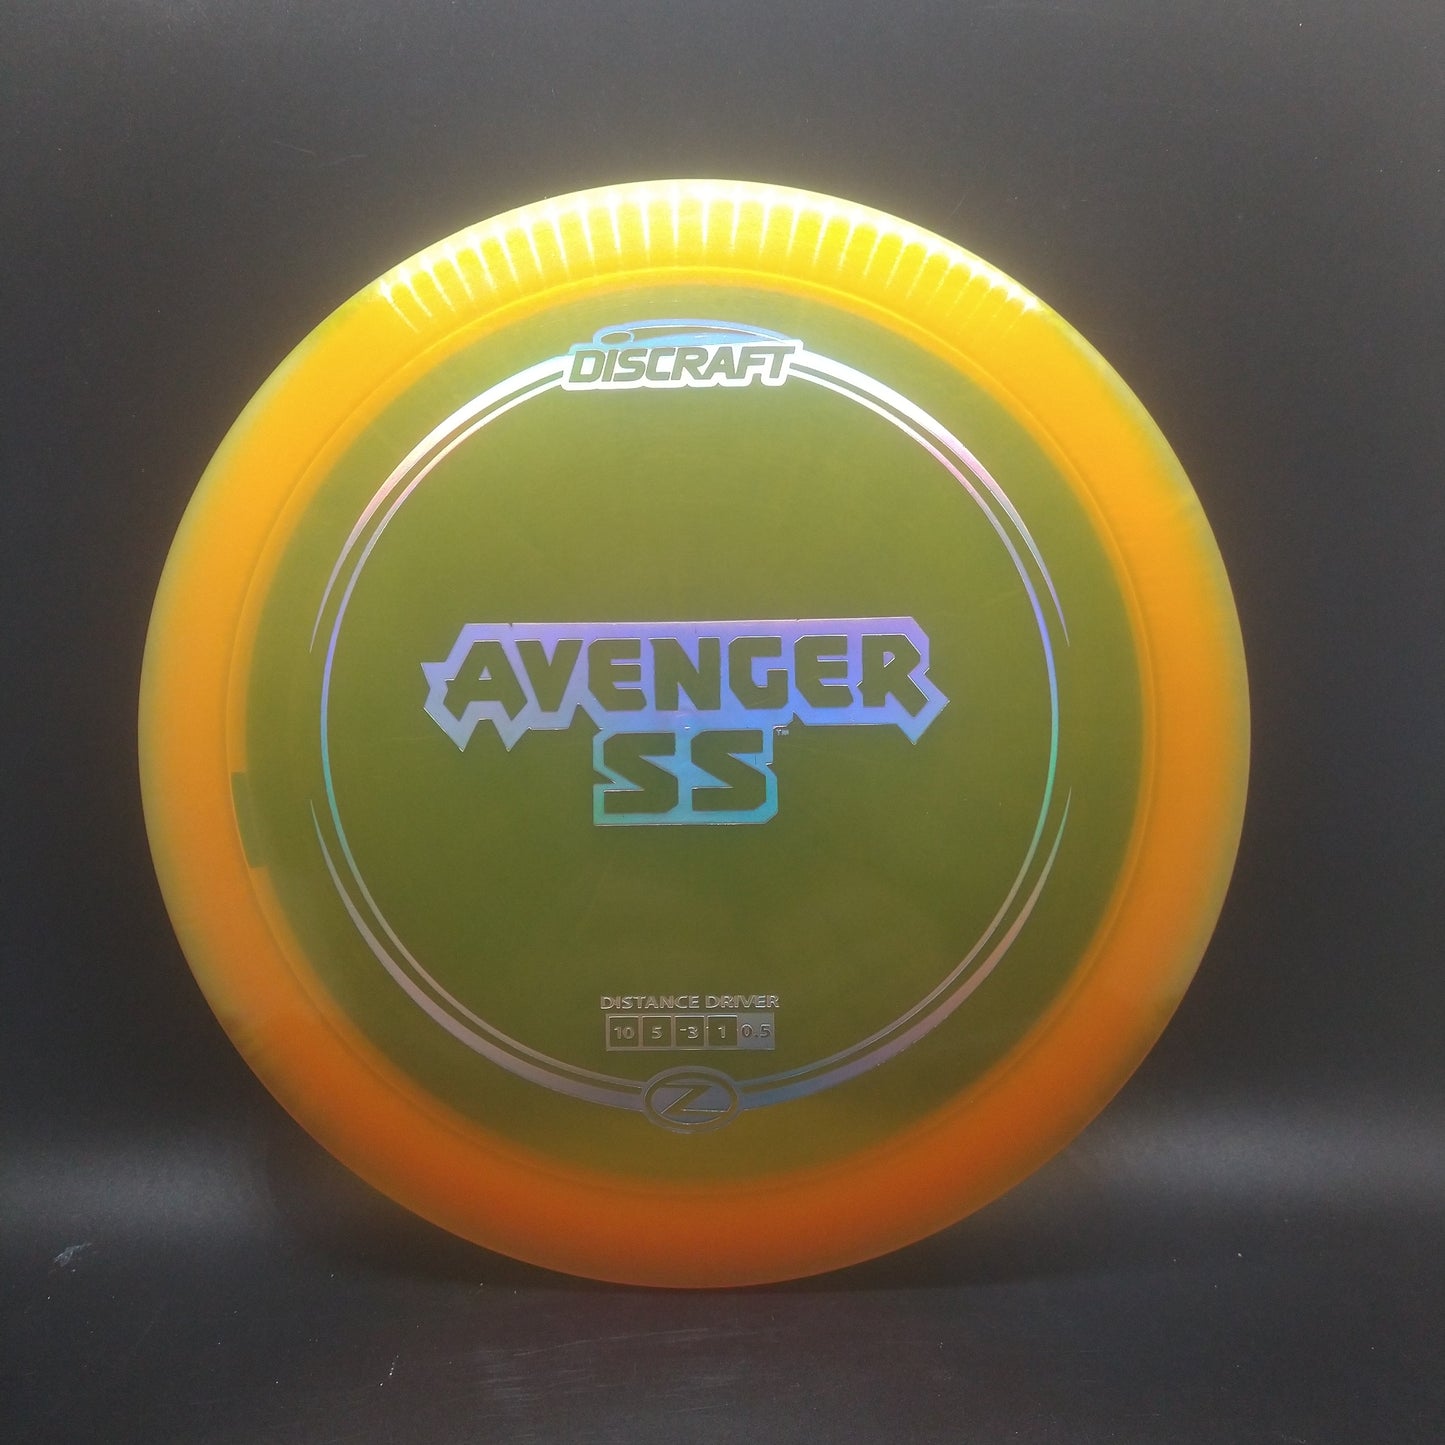 Discraft Z Avenger ss orange with silver stamp 173-4g